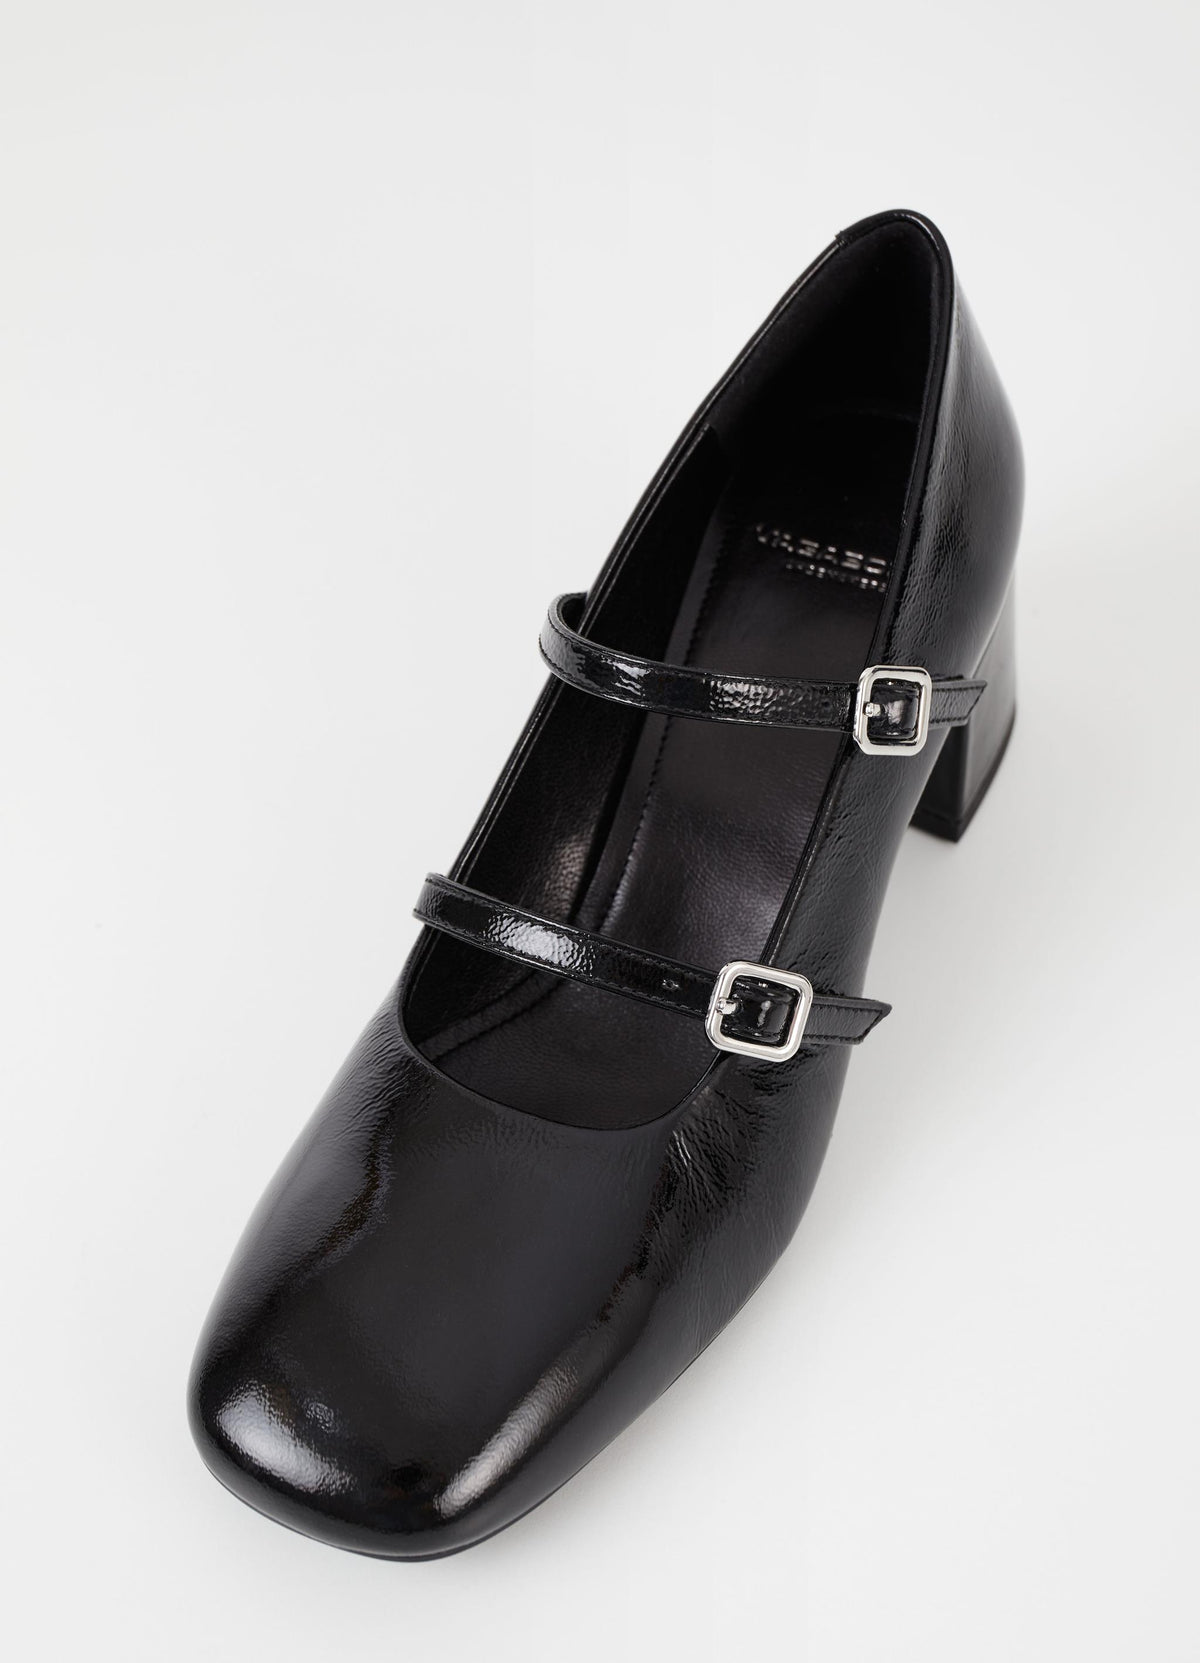 Square toe mary jane shoe with a block heel in black patent leather